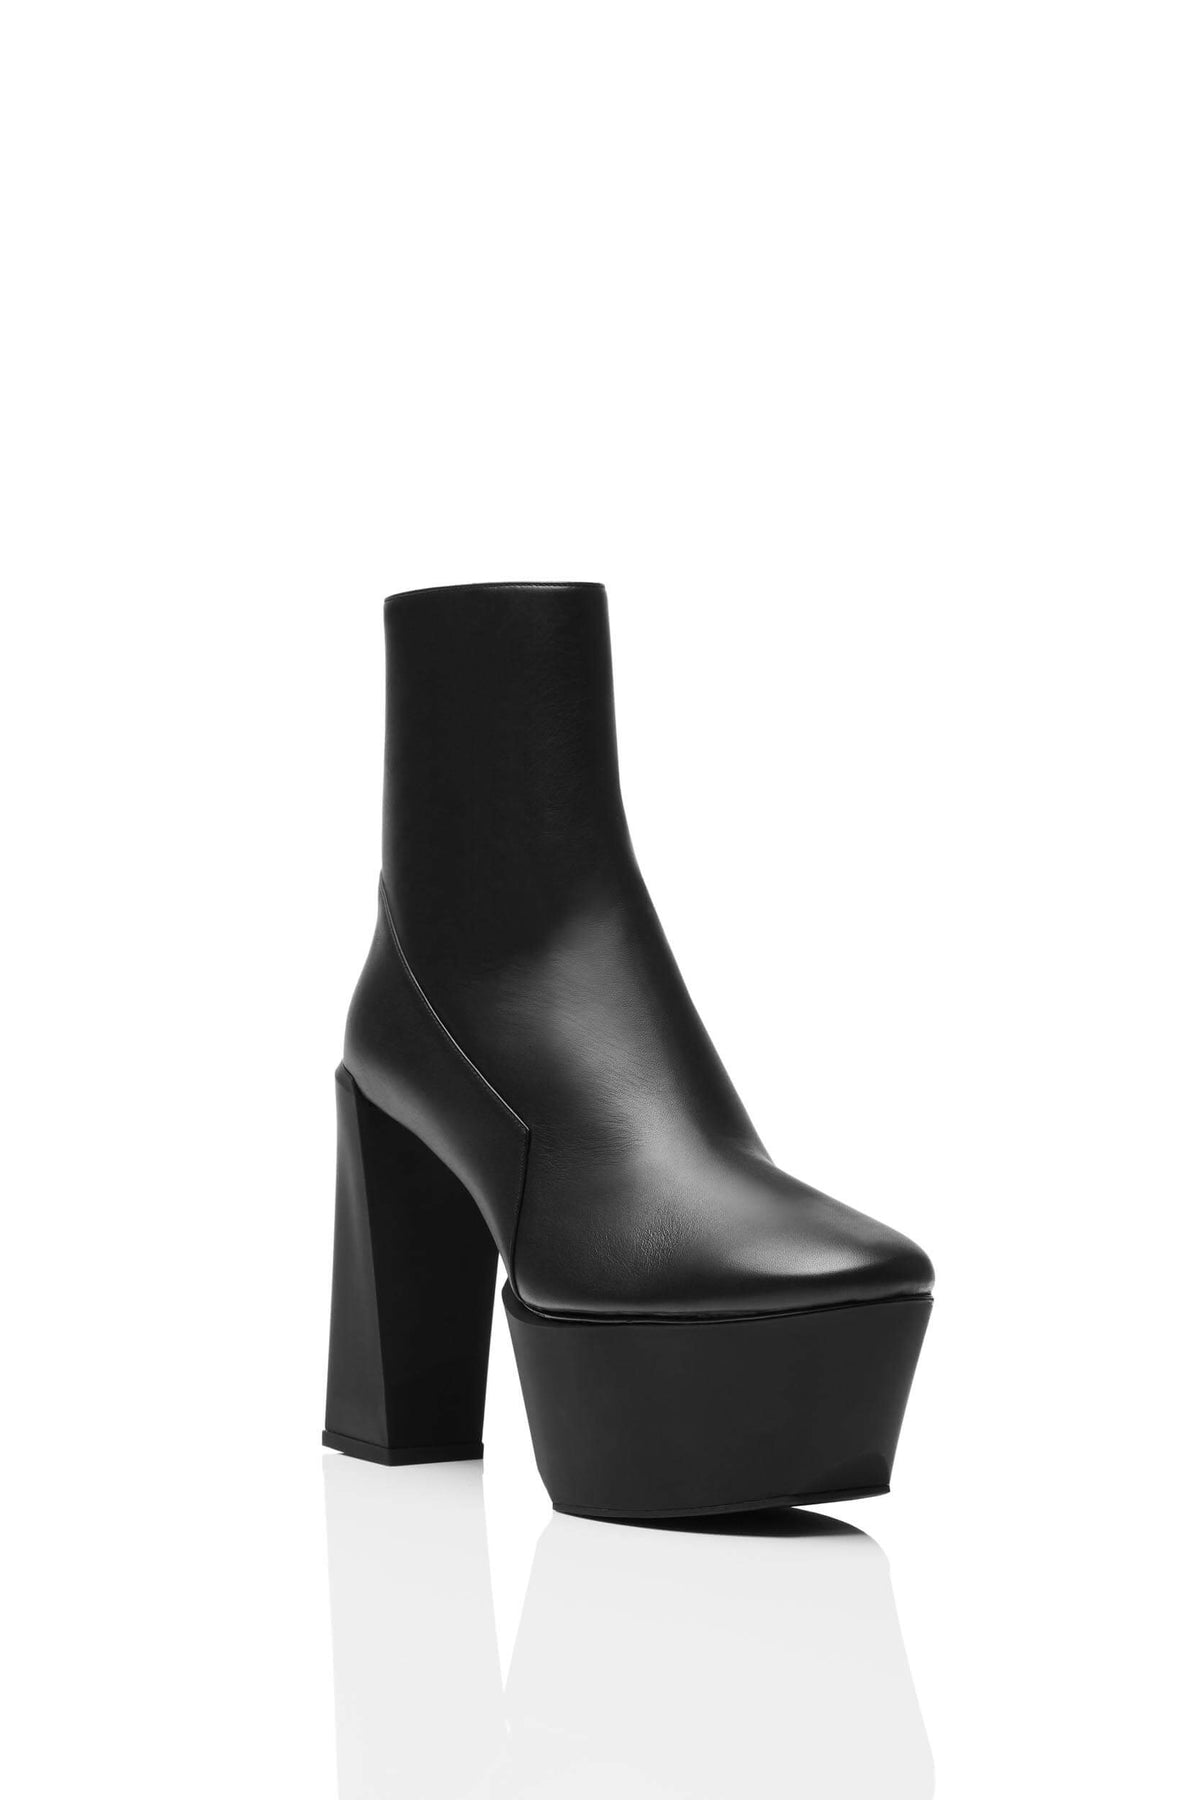 HAIKI 651 – Back zip platform boot with softly rounded toe. Finished in calf nappa in black. 